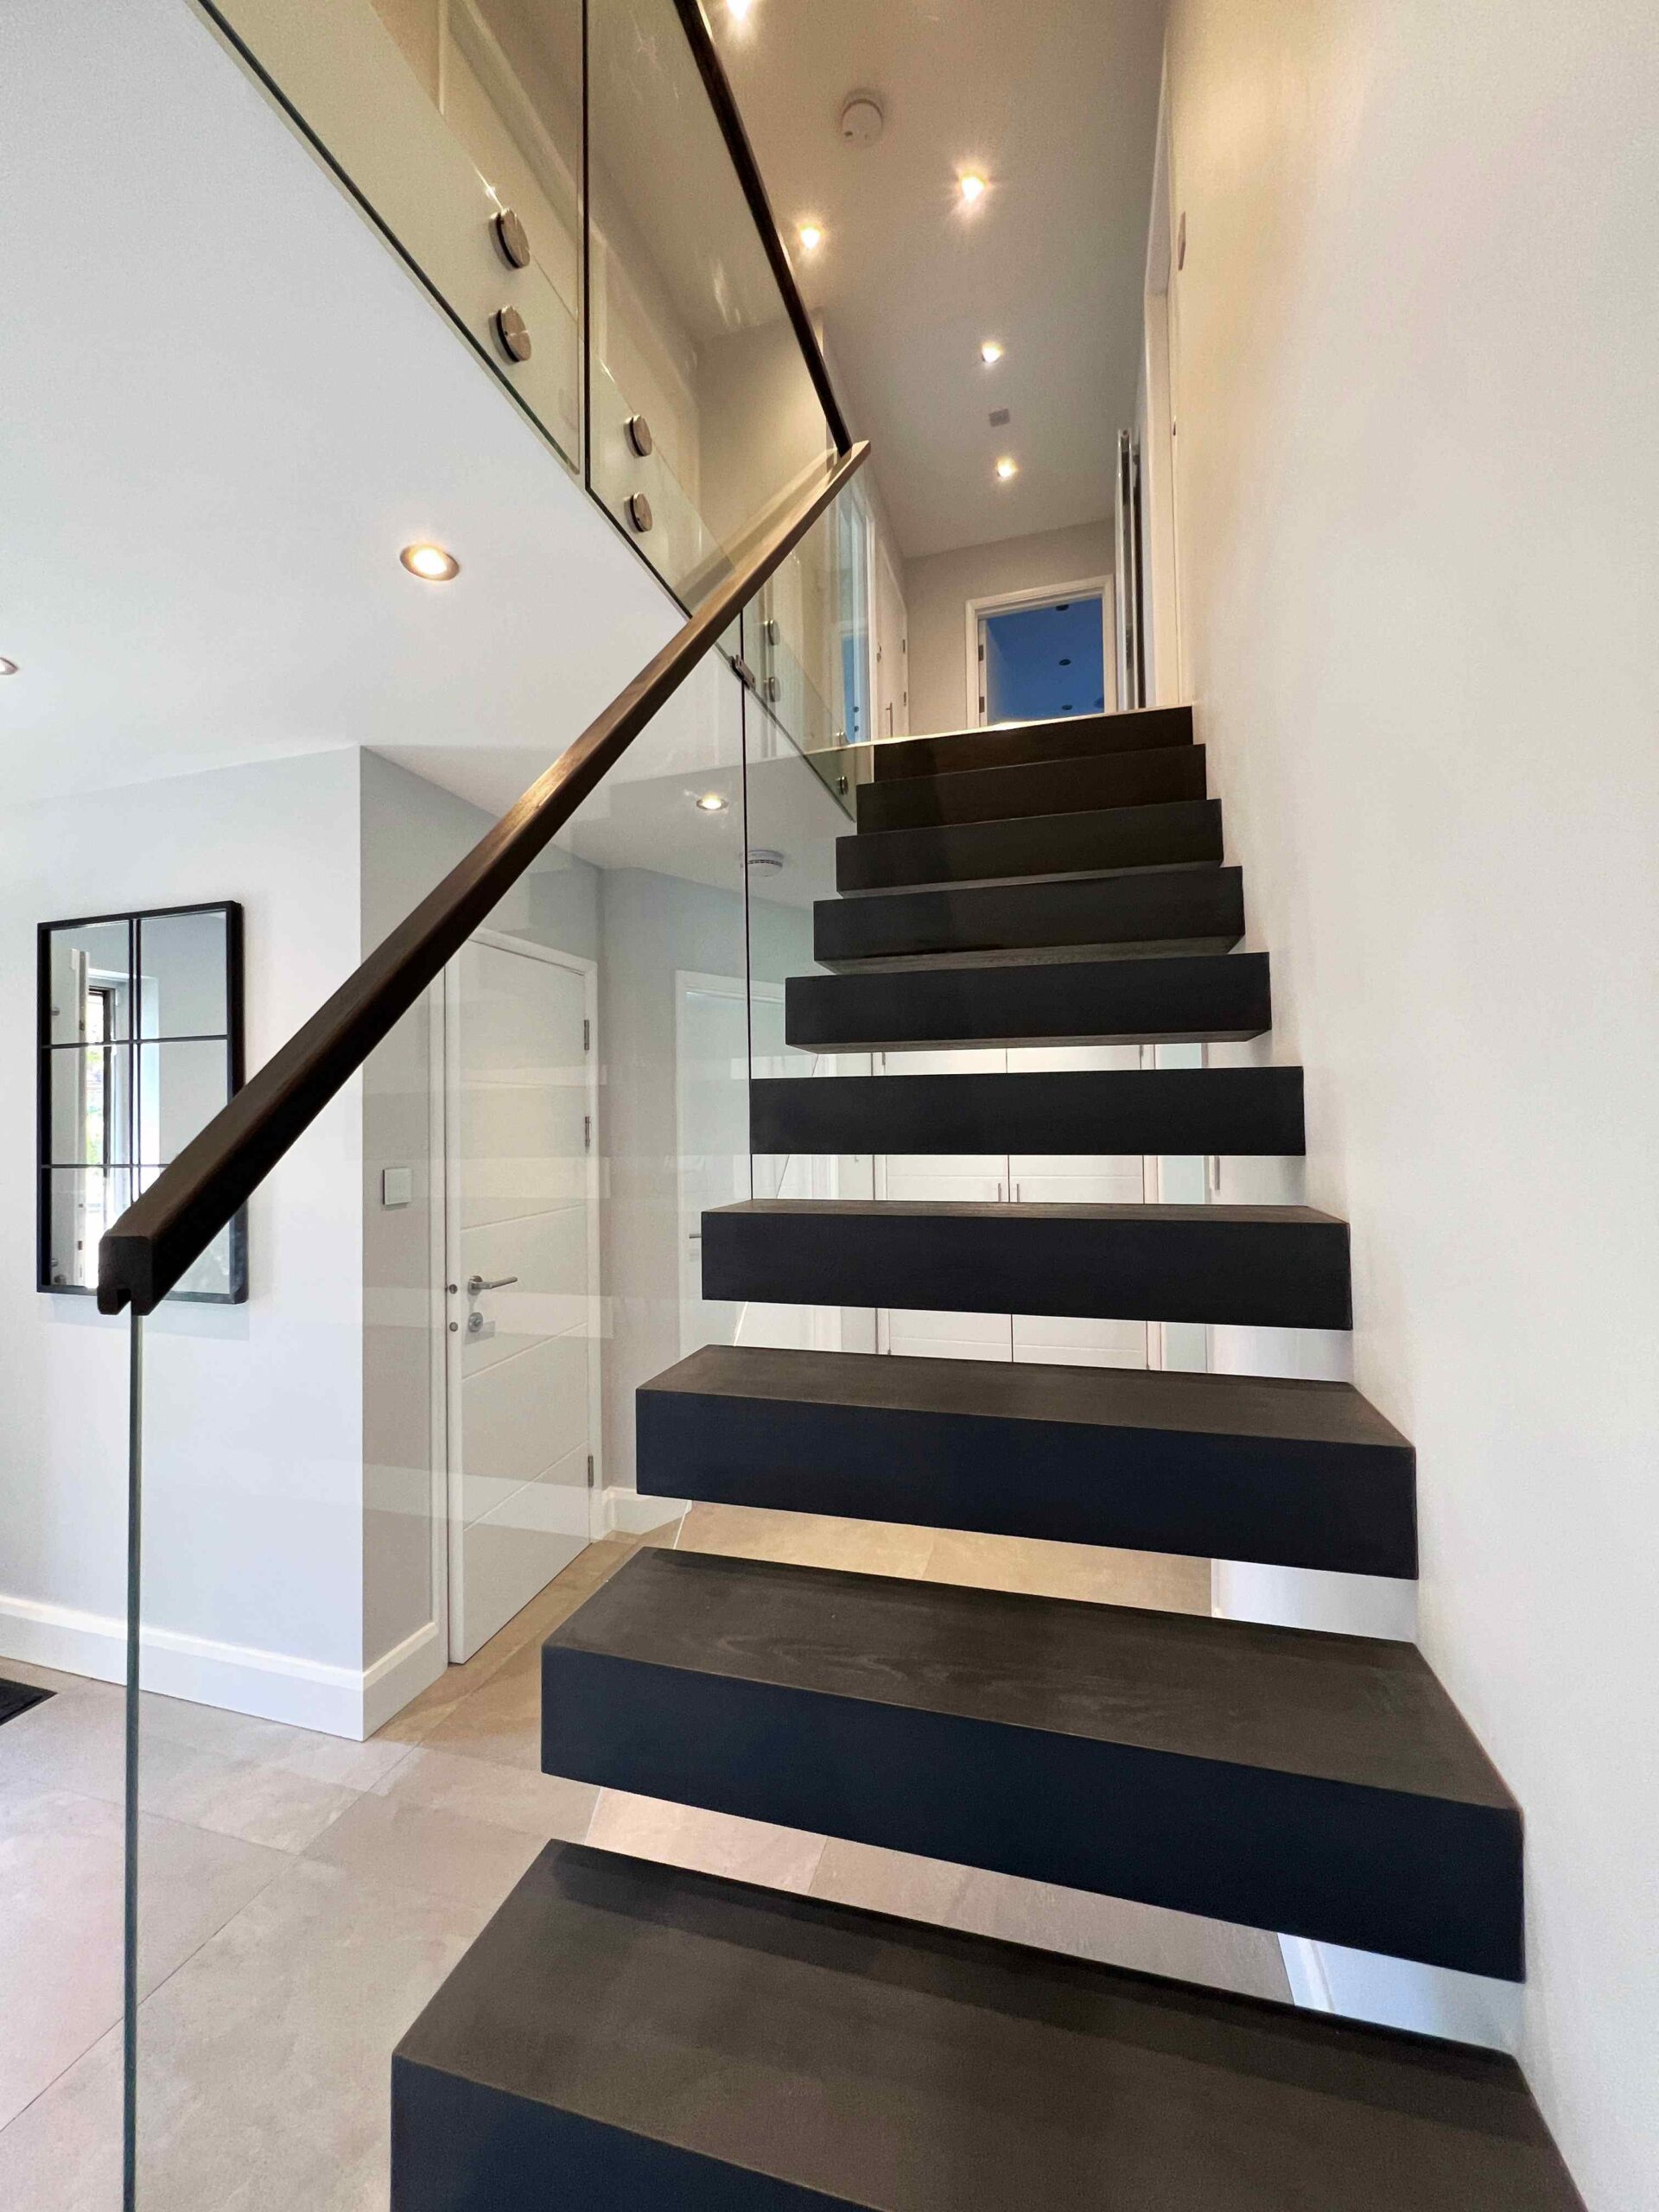 Floating staircase complemented with glass balustrade and black oak stair treads.